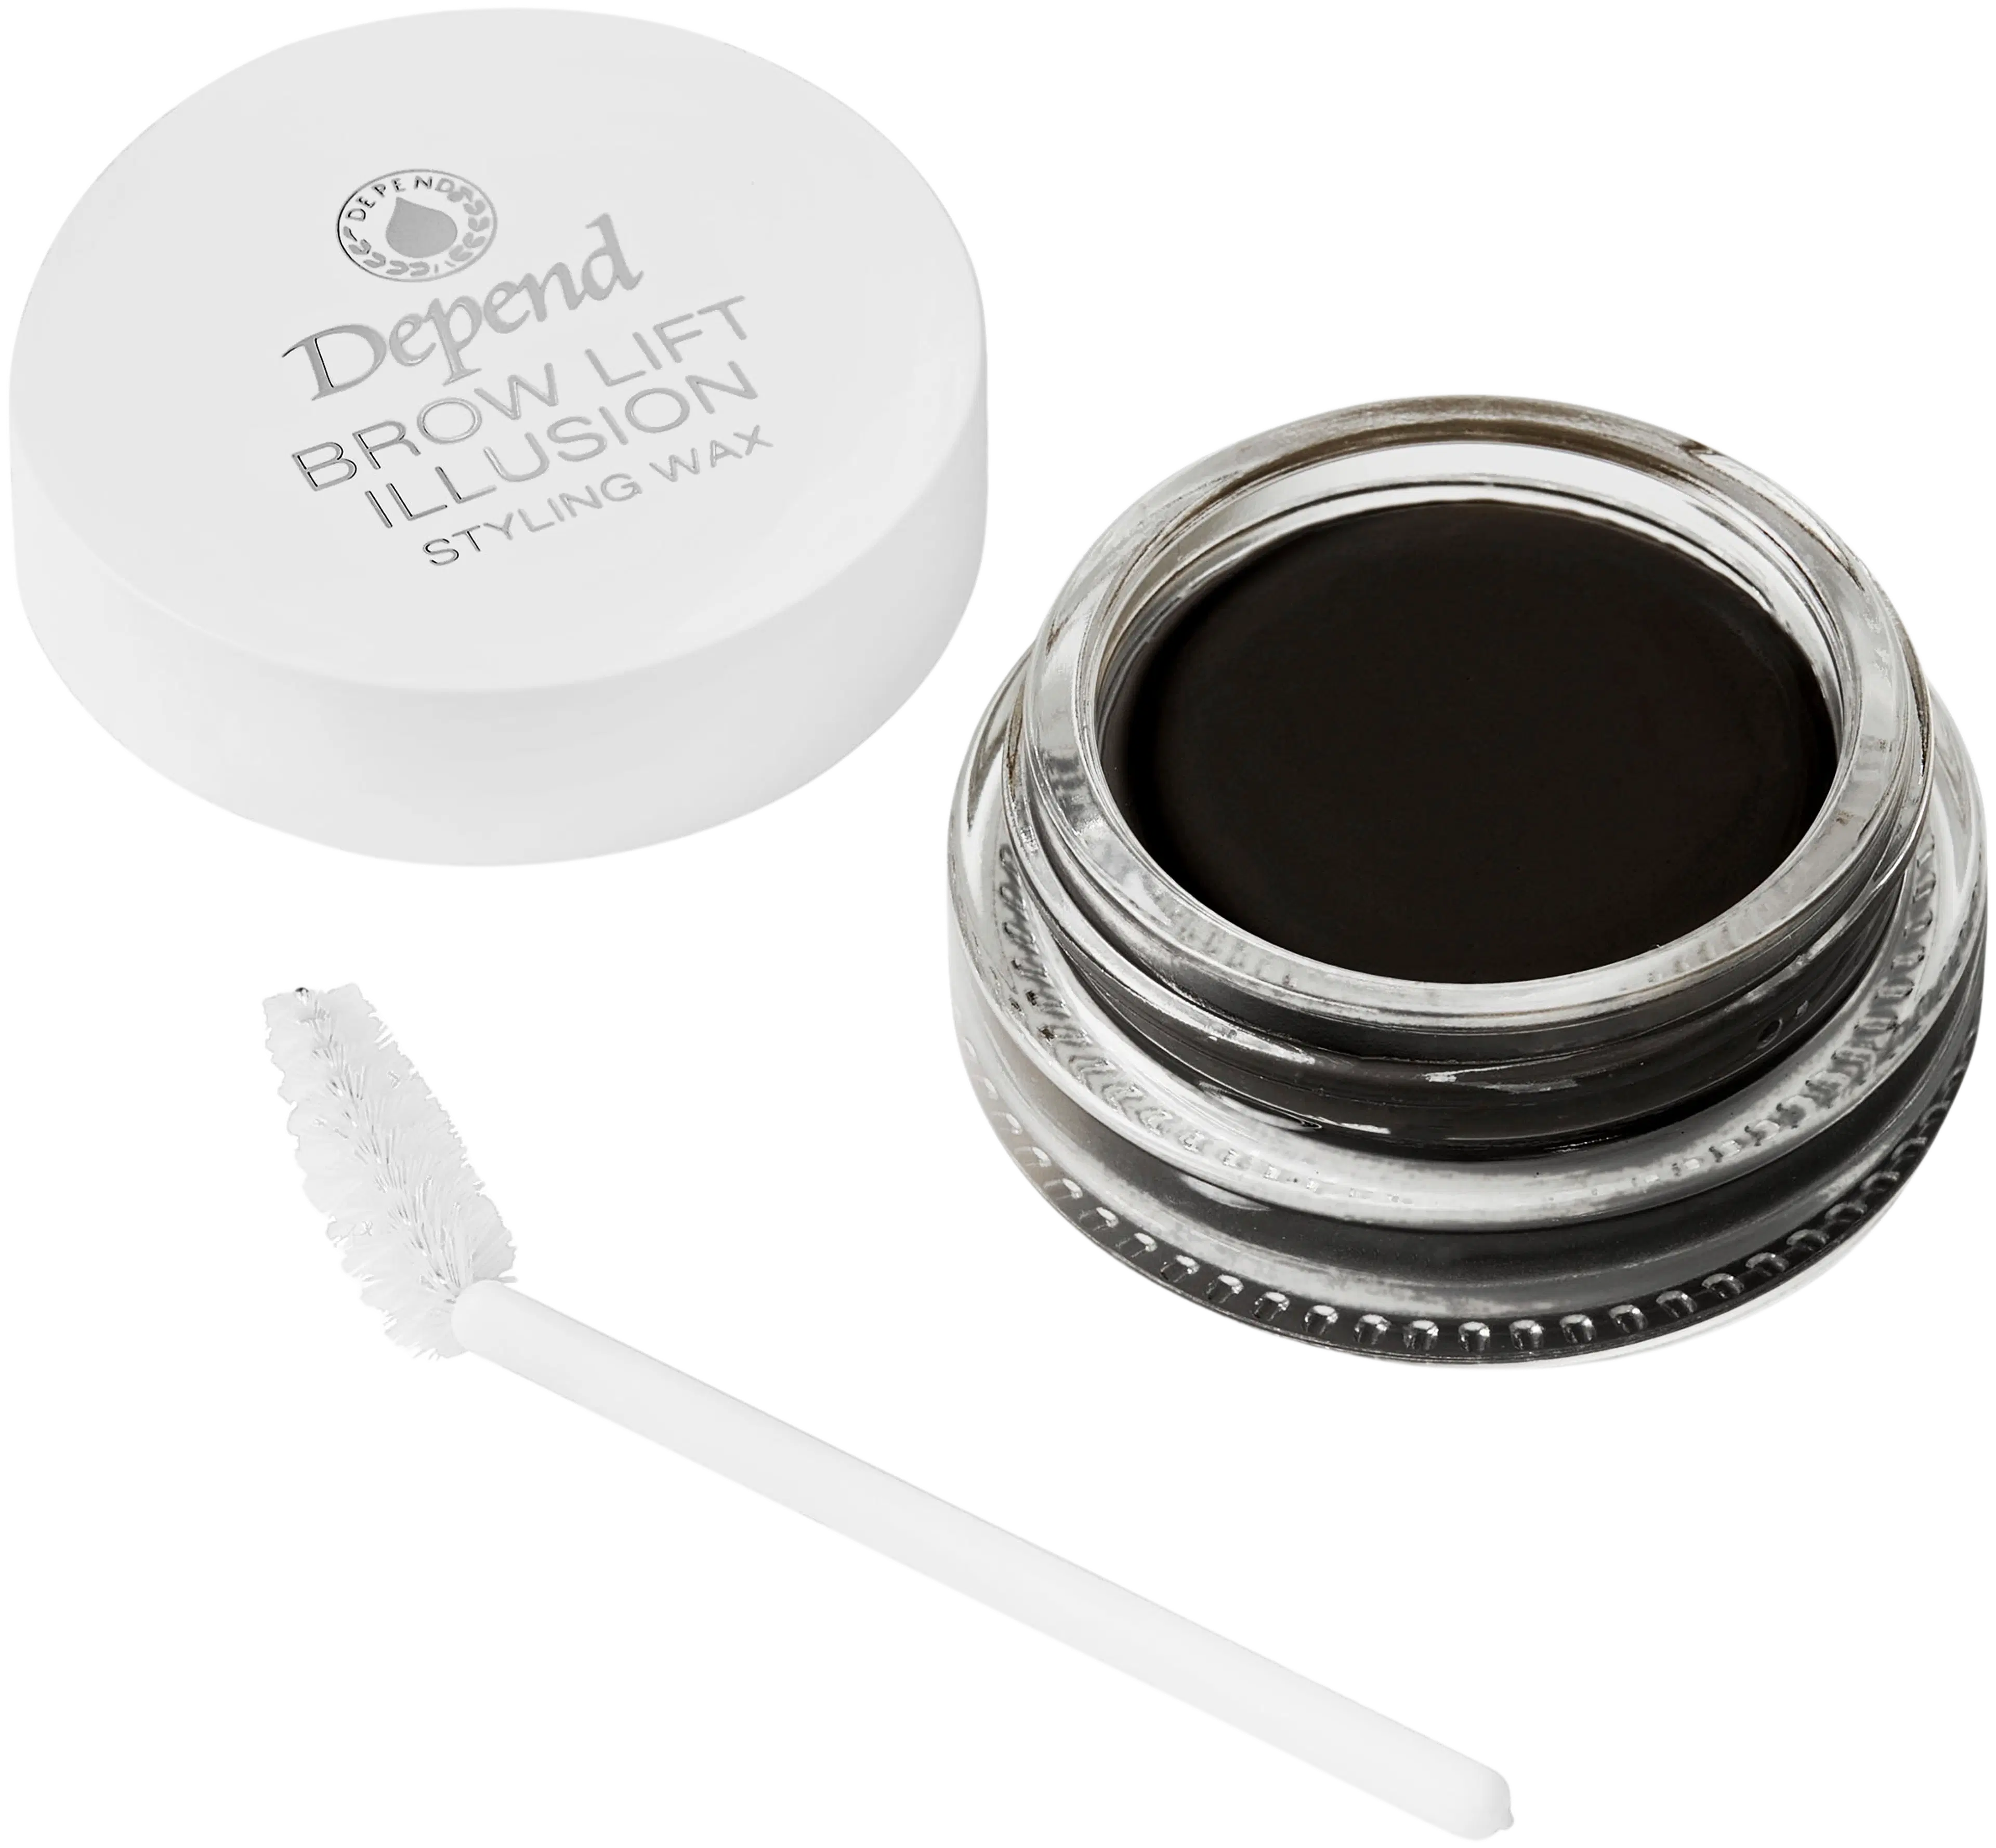 Depend Perfect Eye Brow Lift Illusion Coloured Styling Wax Dark Brown 5g nr 4975